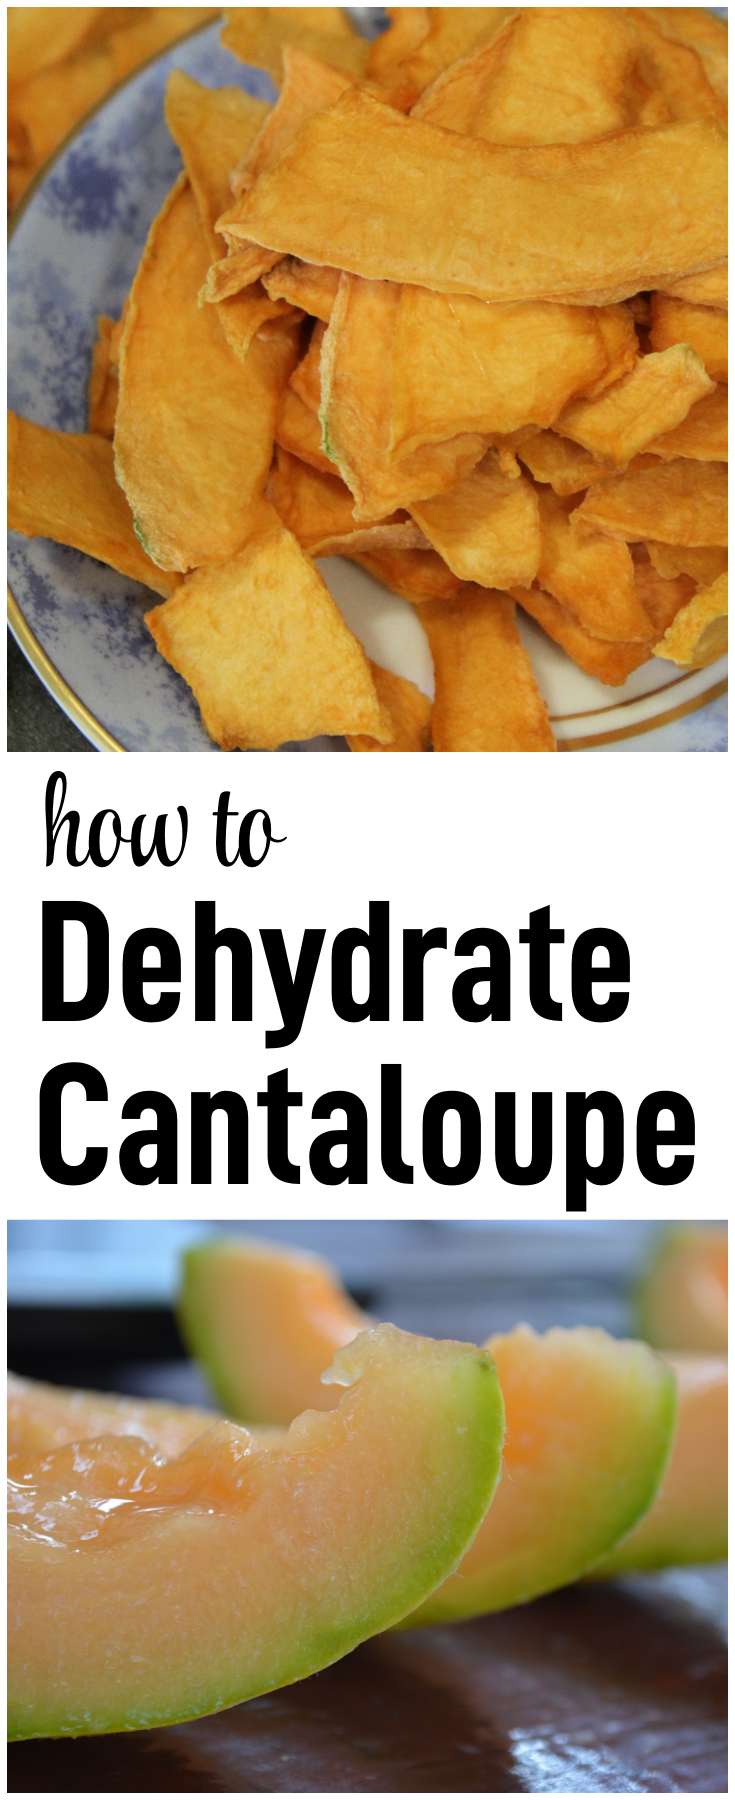 Learn how to dehydrate cantaloupe with these step-by-step directions - the result is a delicious, healthy snack that serves as a great way to use a lot of cantaloupe!  #dehydrate #cantaloupe #chips #healthy #fruit